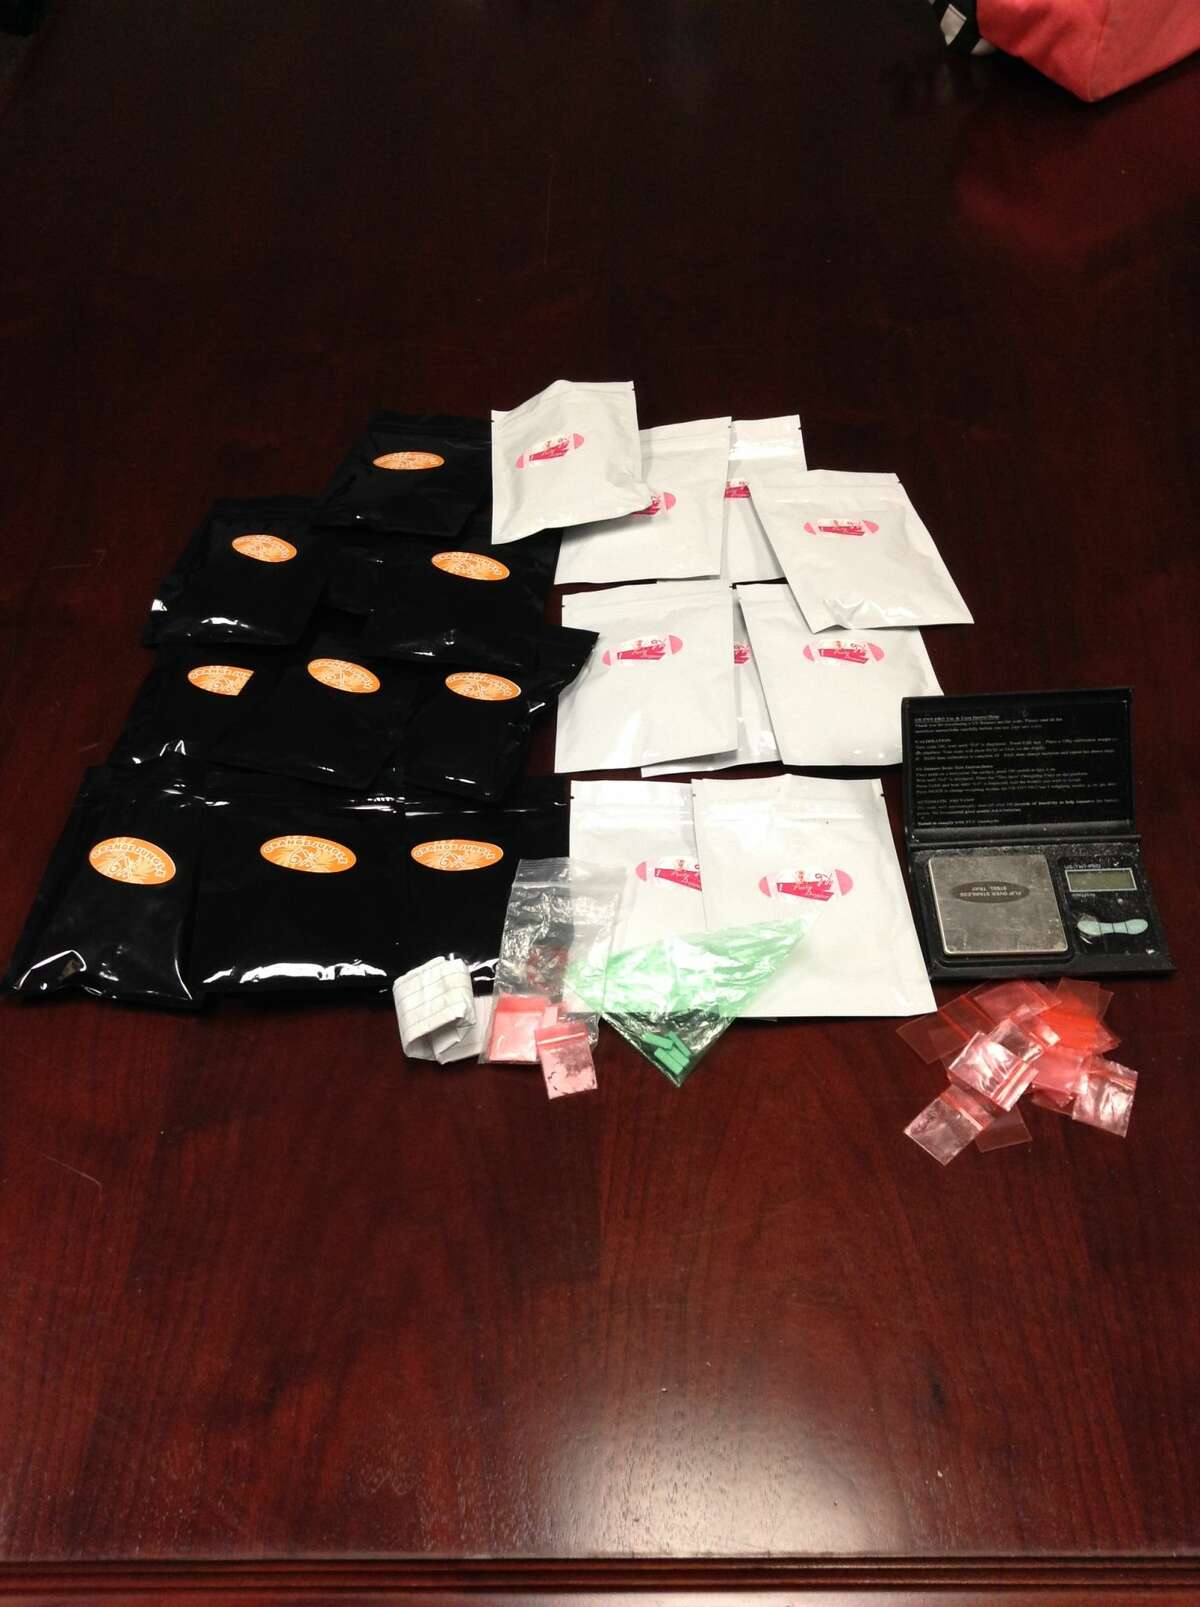 Six residents of Richmond and Rosenberg were arrested Friday, March 3, 2017, on suspicion of manufacturing and delivering controlled substances. 